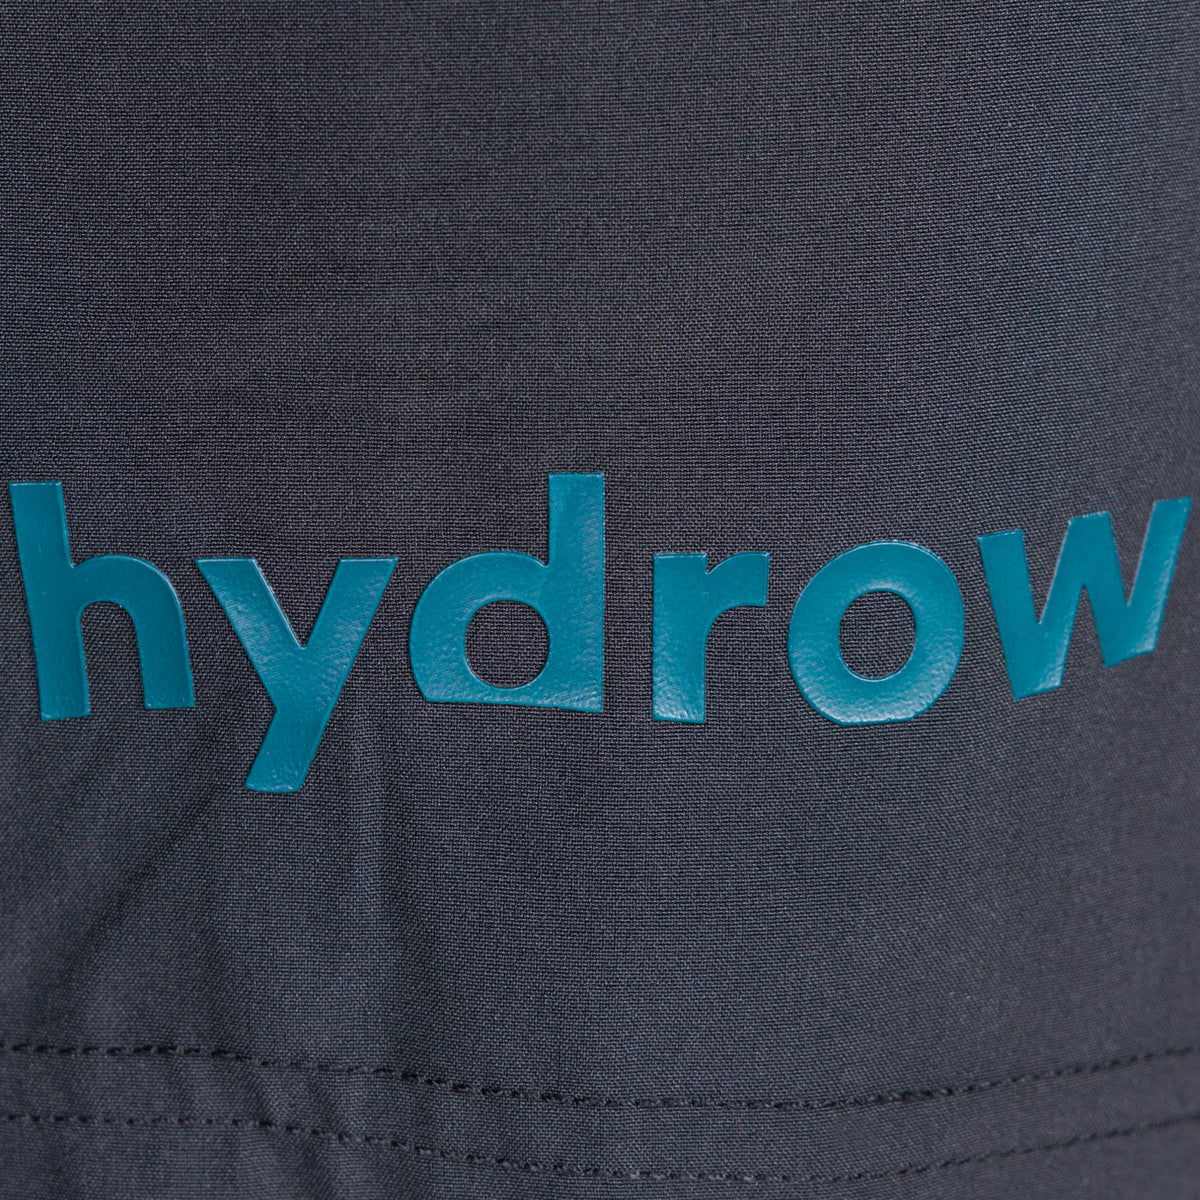 hydrow logo zoomed in on black compression short